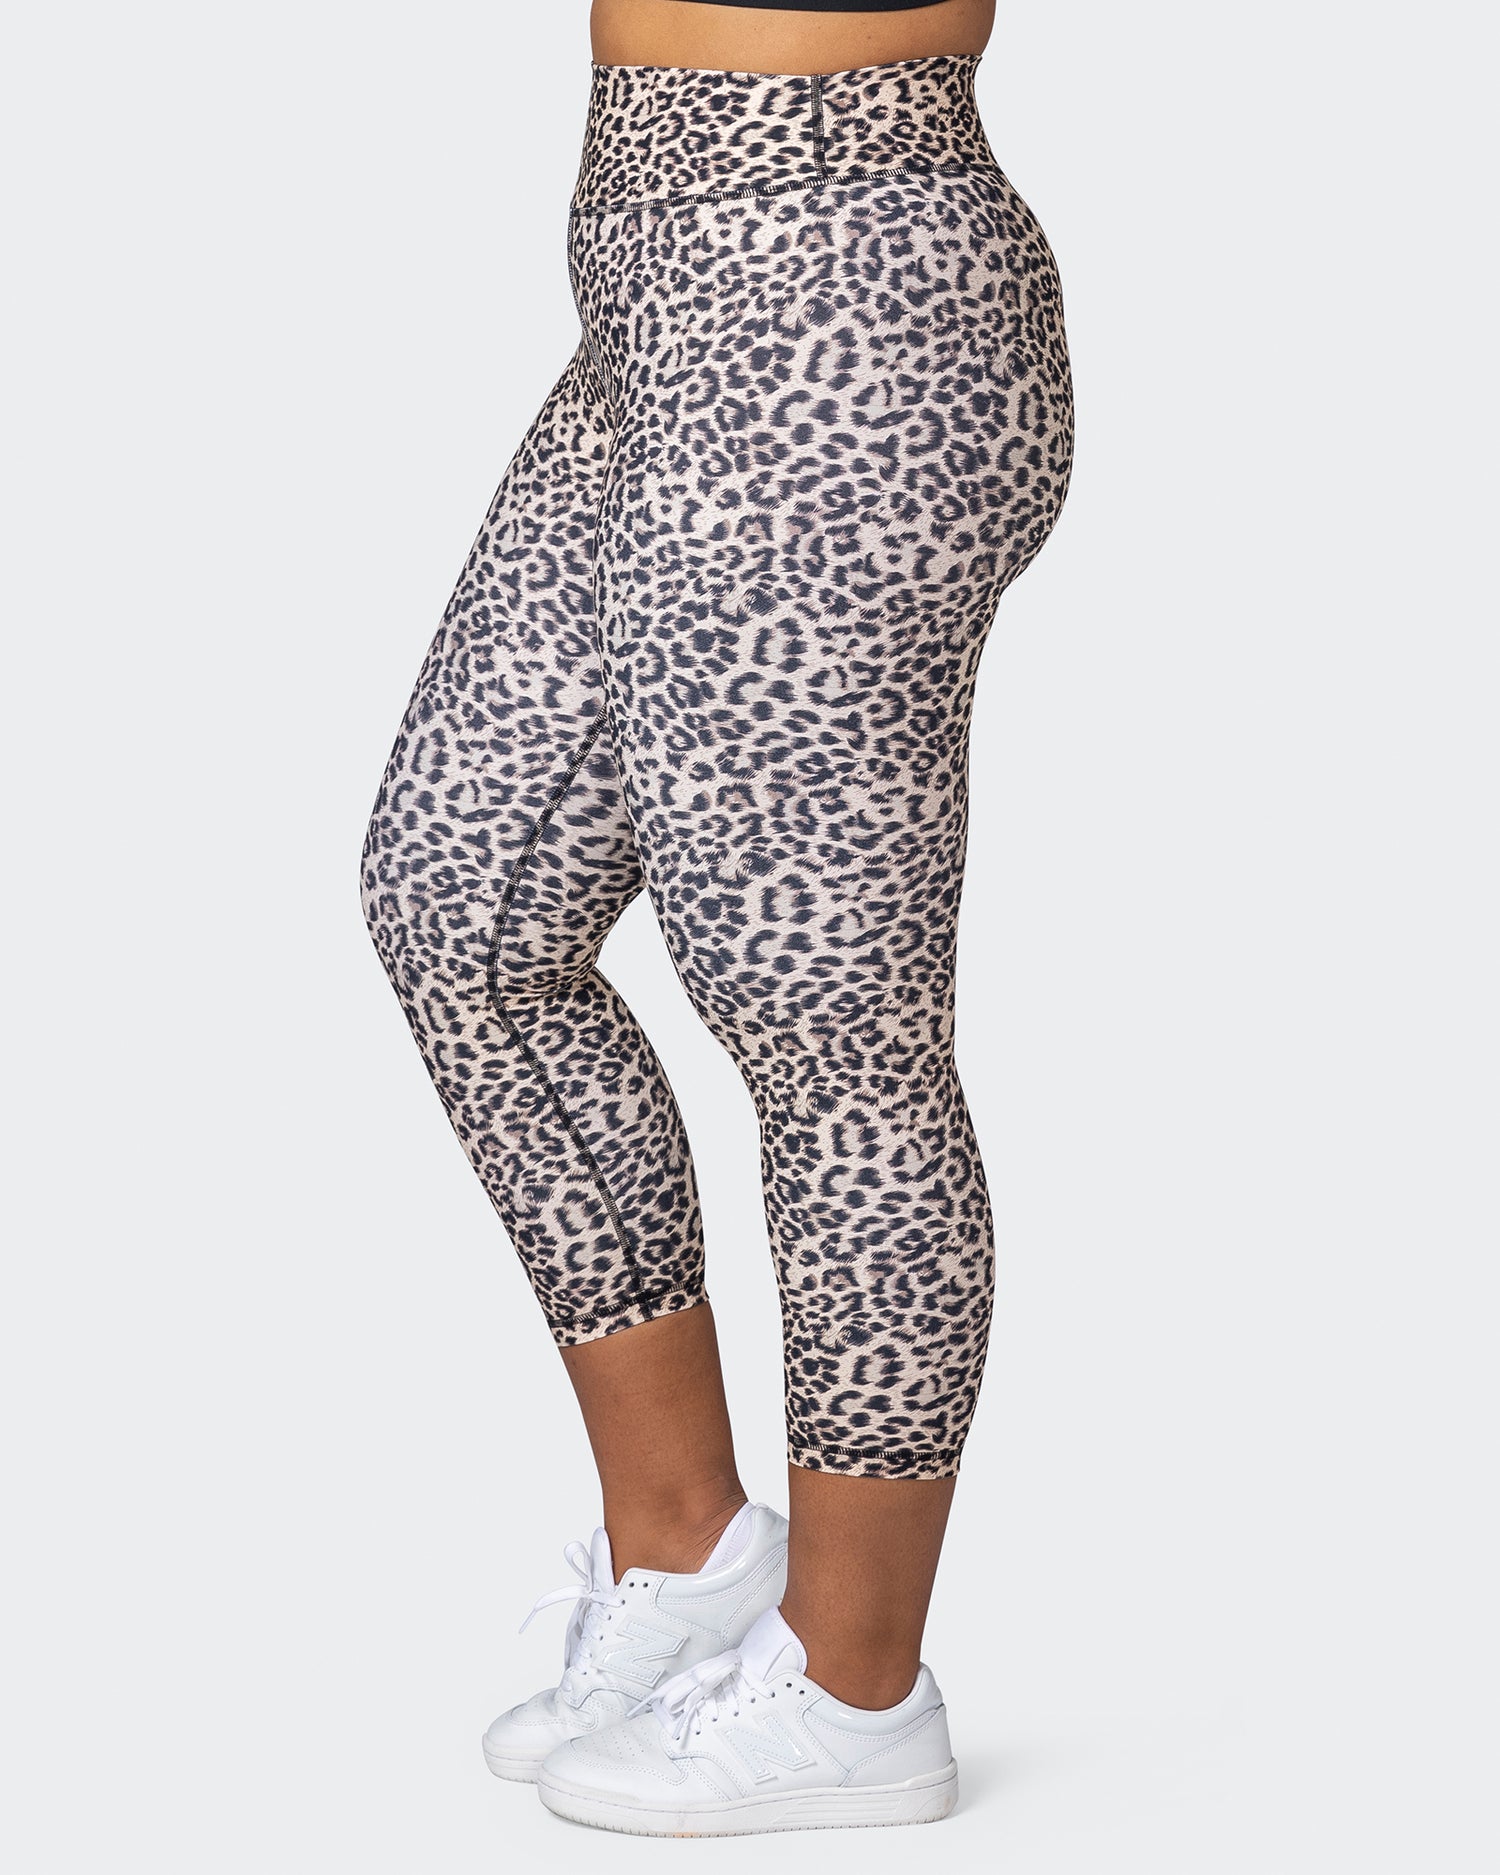 Signature Scrunch 7/8 Leggings - Yellow Leopard - Muscle Nation